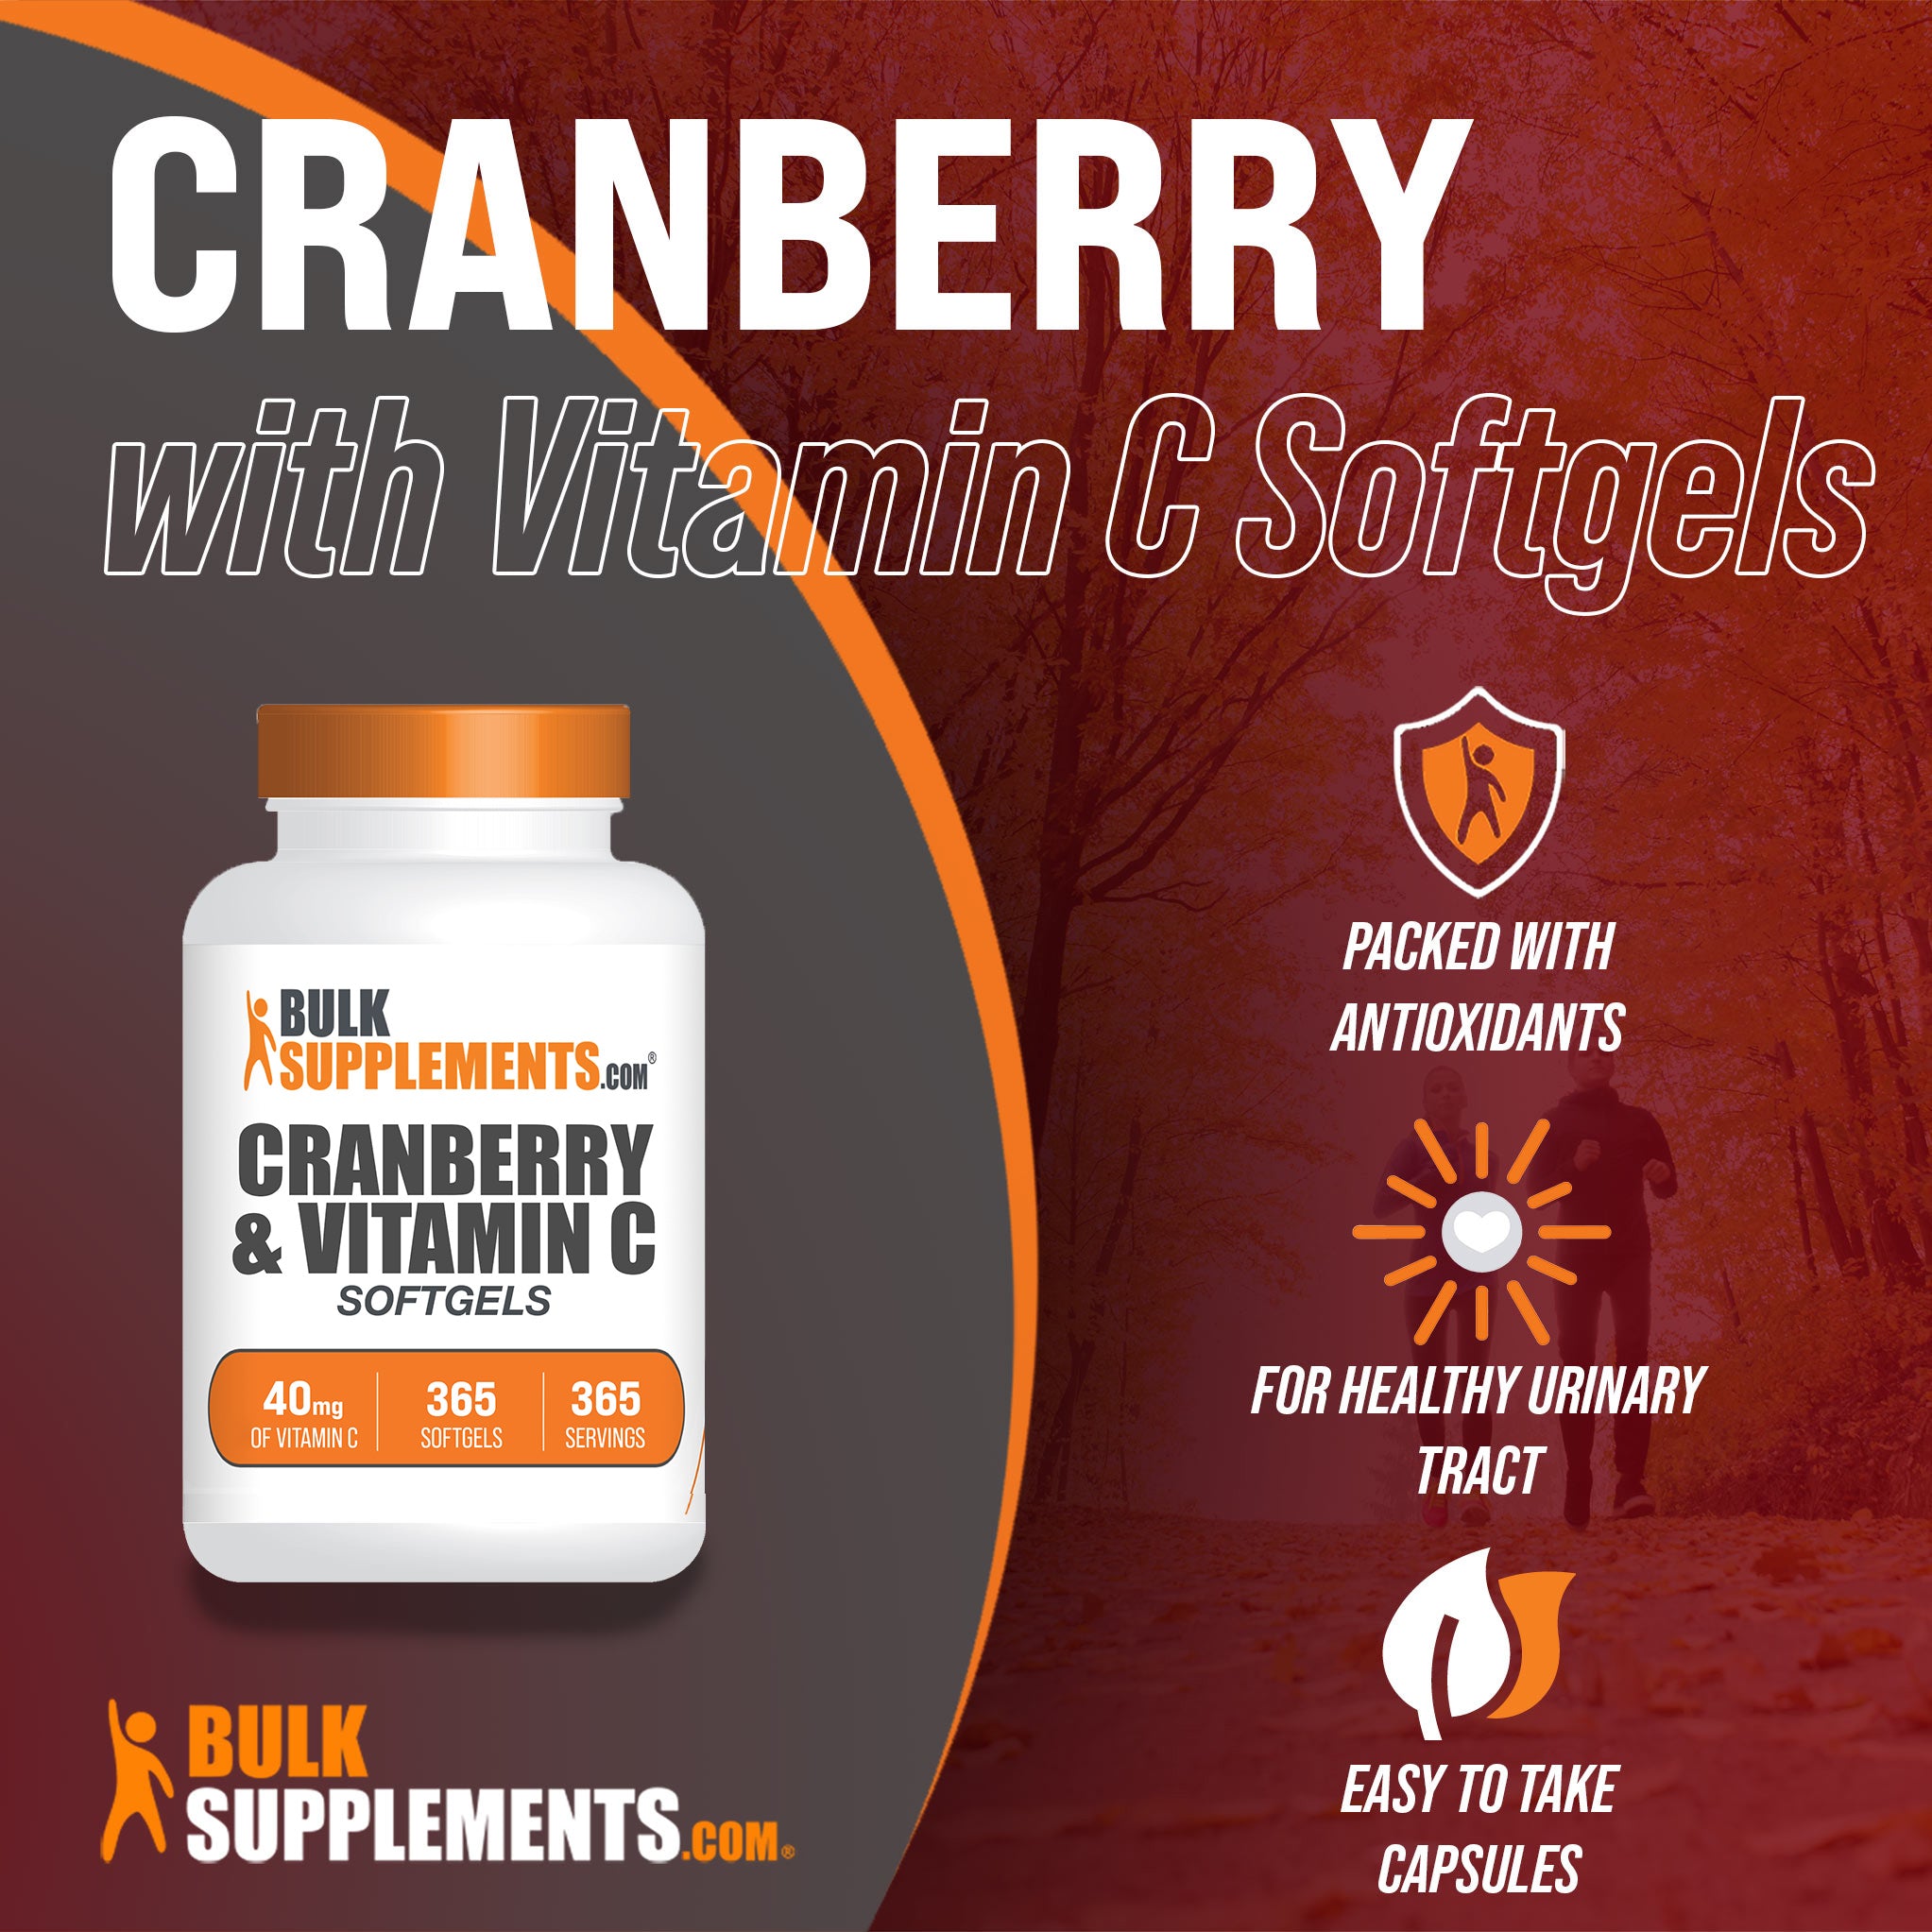 Cranberry and Vitamin C Antioxidant Supplements. Detailing 365 softgel variety